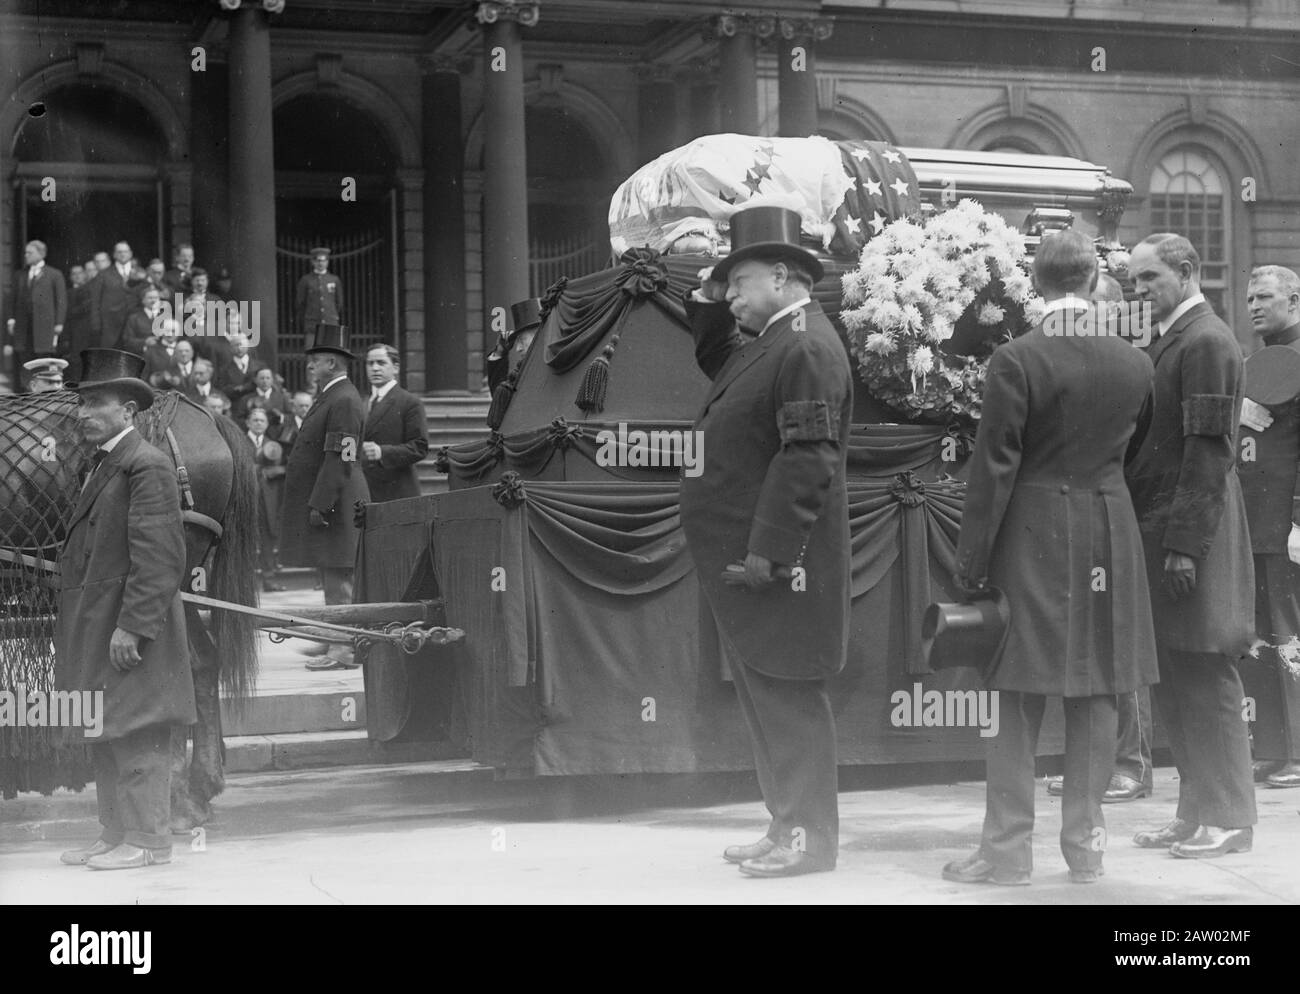 President William Howard Taft at the funeral of William Jay Gaynor (1849-1913), Mayor of New York City Stock Photo